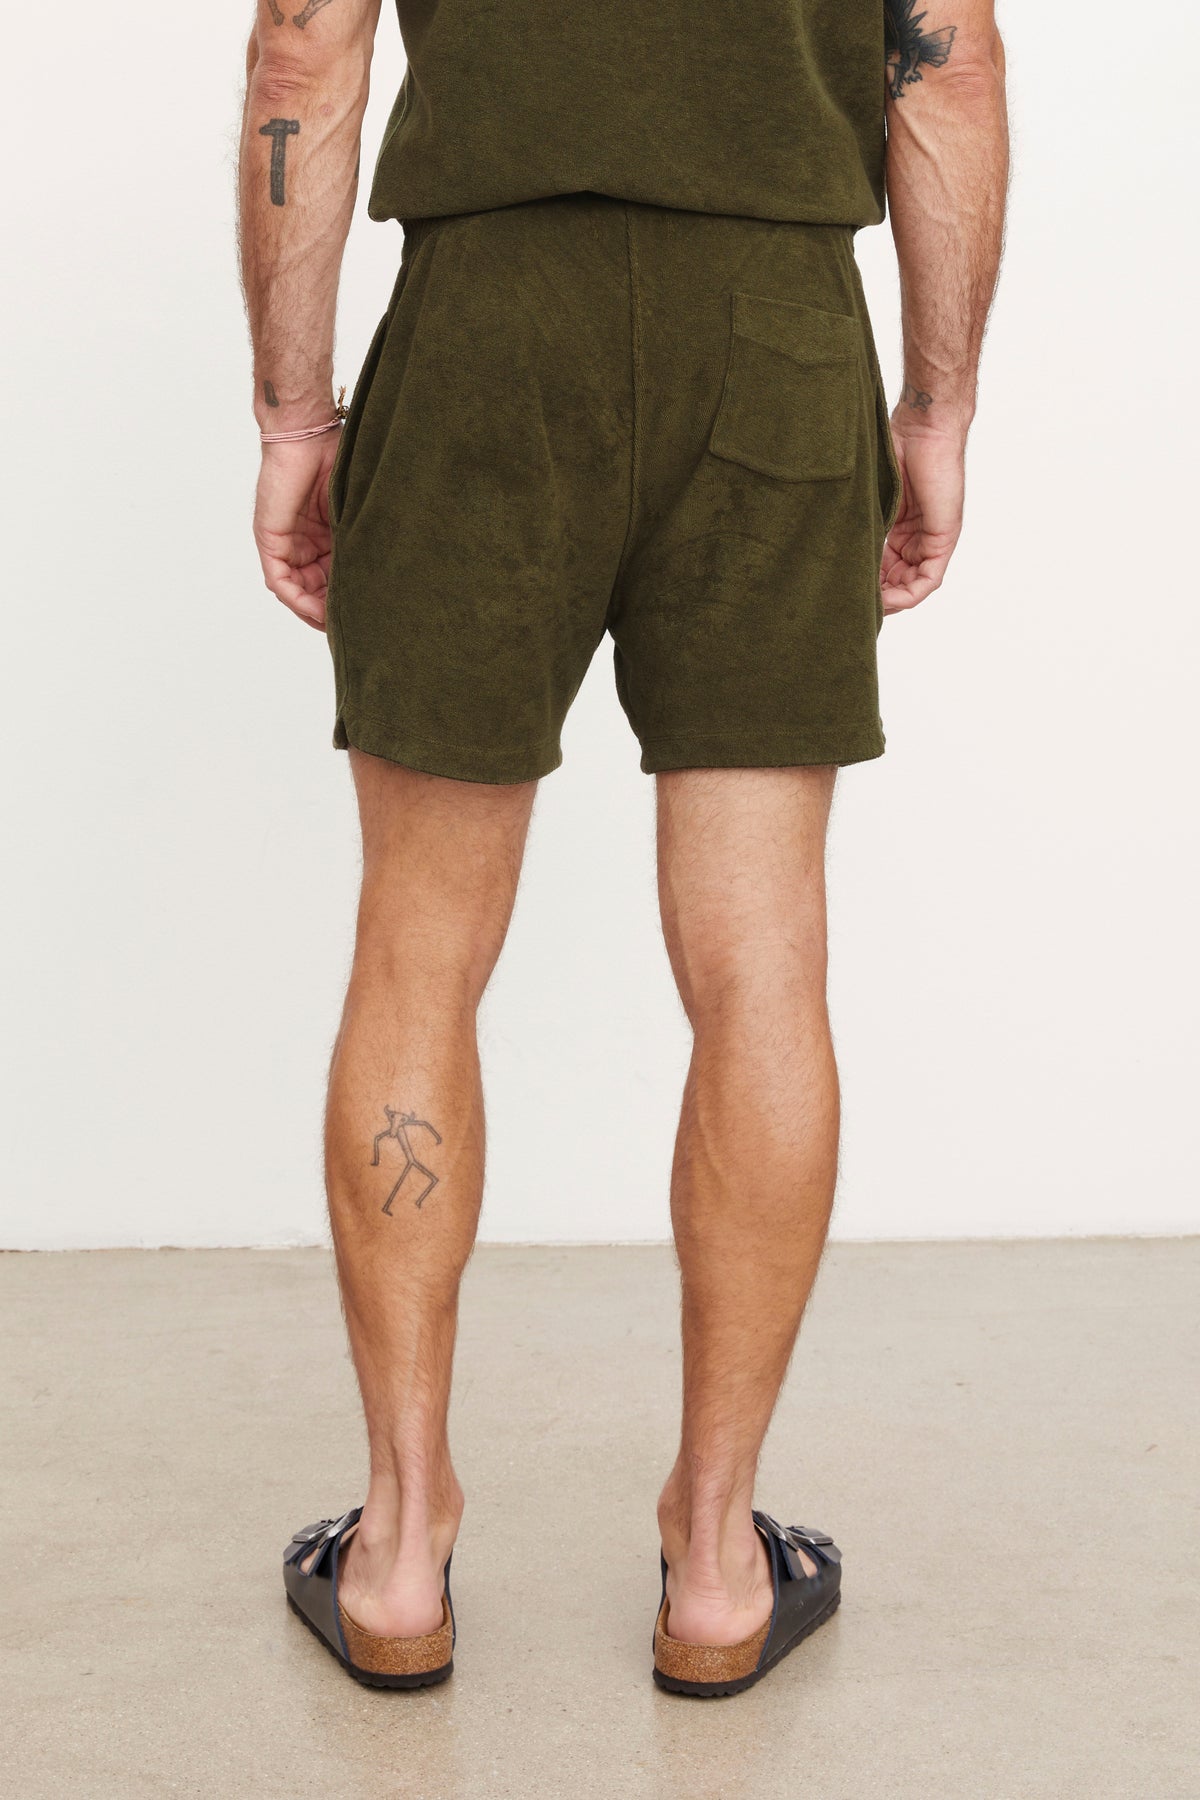   Rear view of a man wearing Velvet by Graham & Spencer's Salem shorts and brown loafers, standing with hands slightly behind him, highlighting visible tattoos on his arms and legs. 